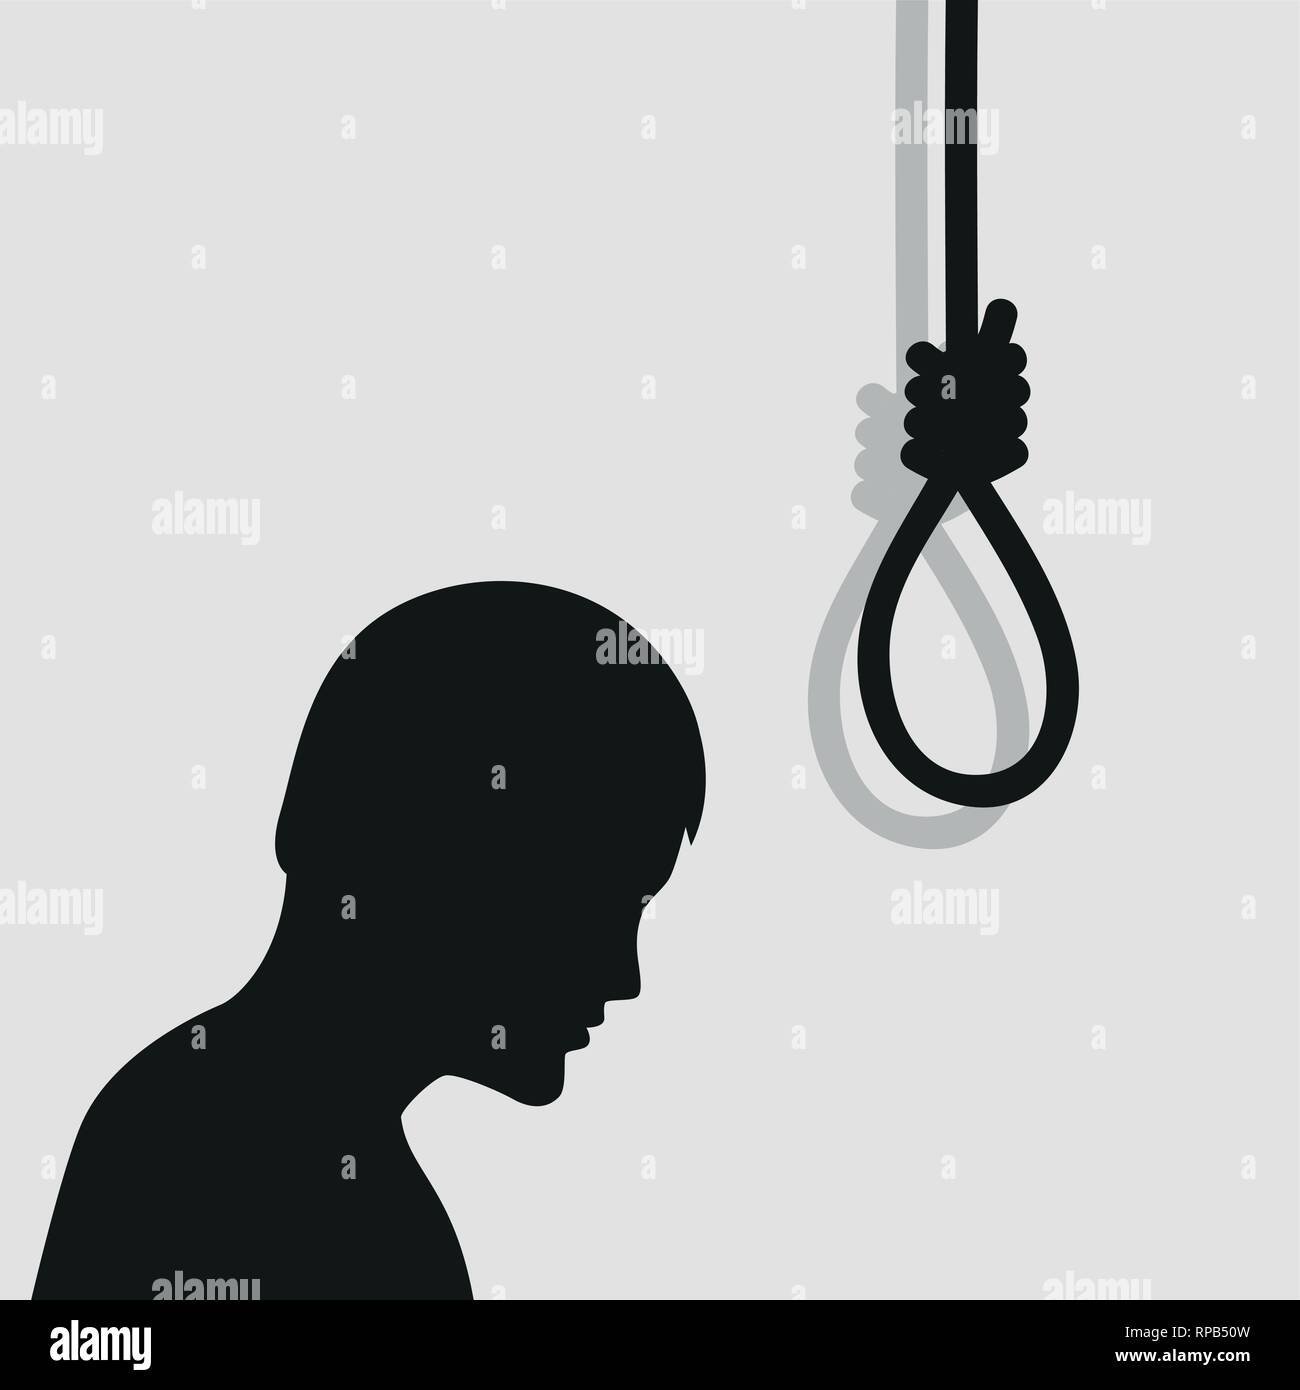 depressive man think about suicide at the rope silhouette vector illustration EPS10 Stock Vector